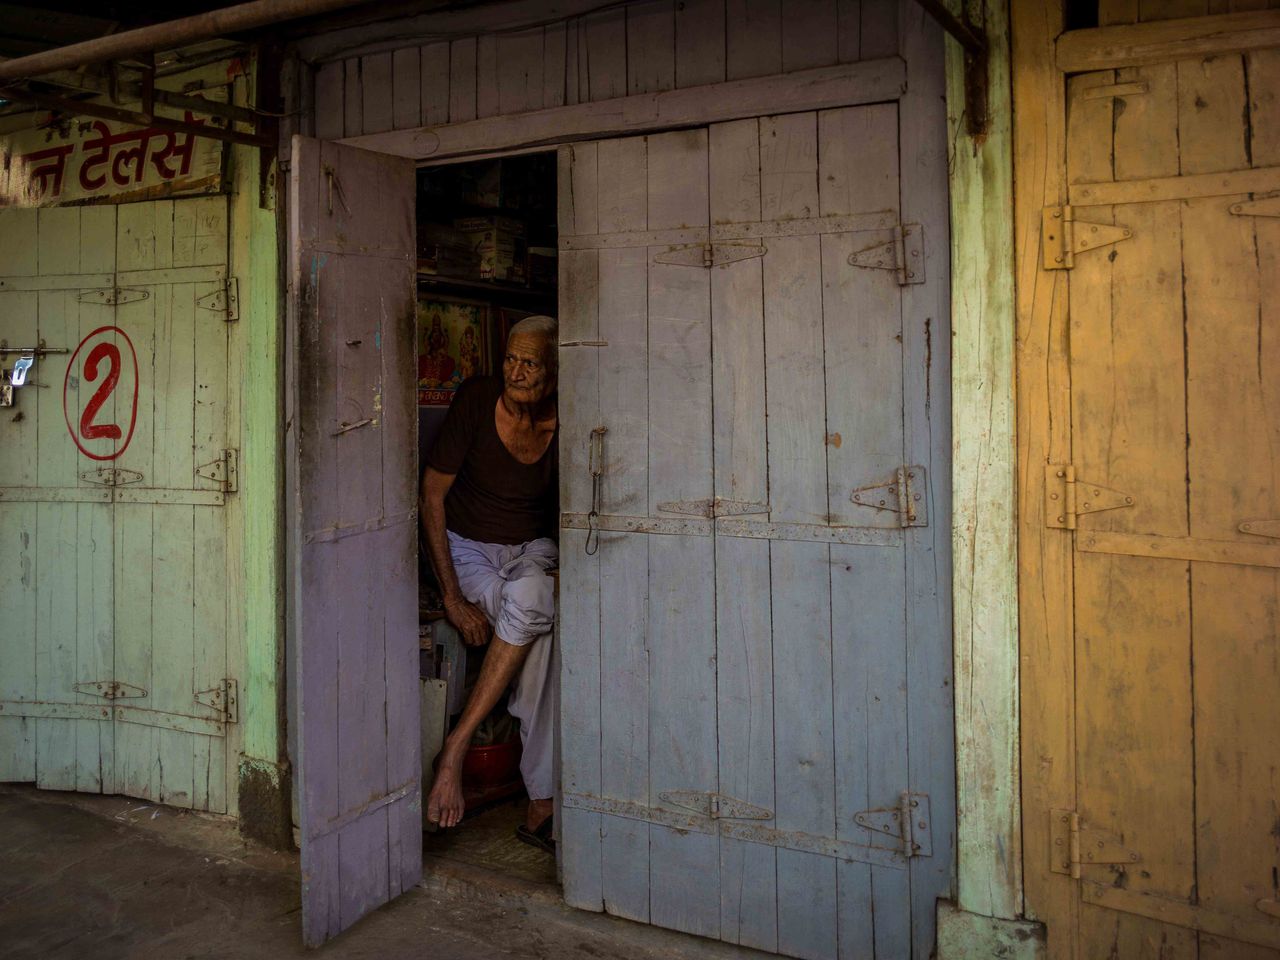 A shopkeeper in Khargone, India, peers out of his shop on April 15, 2022, a few days after the unrest. The authorities had imposed a curfew, and he was waiting for it to be relaxed so he could open for business.